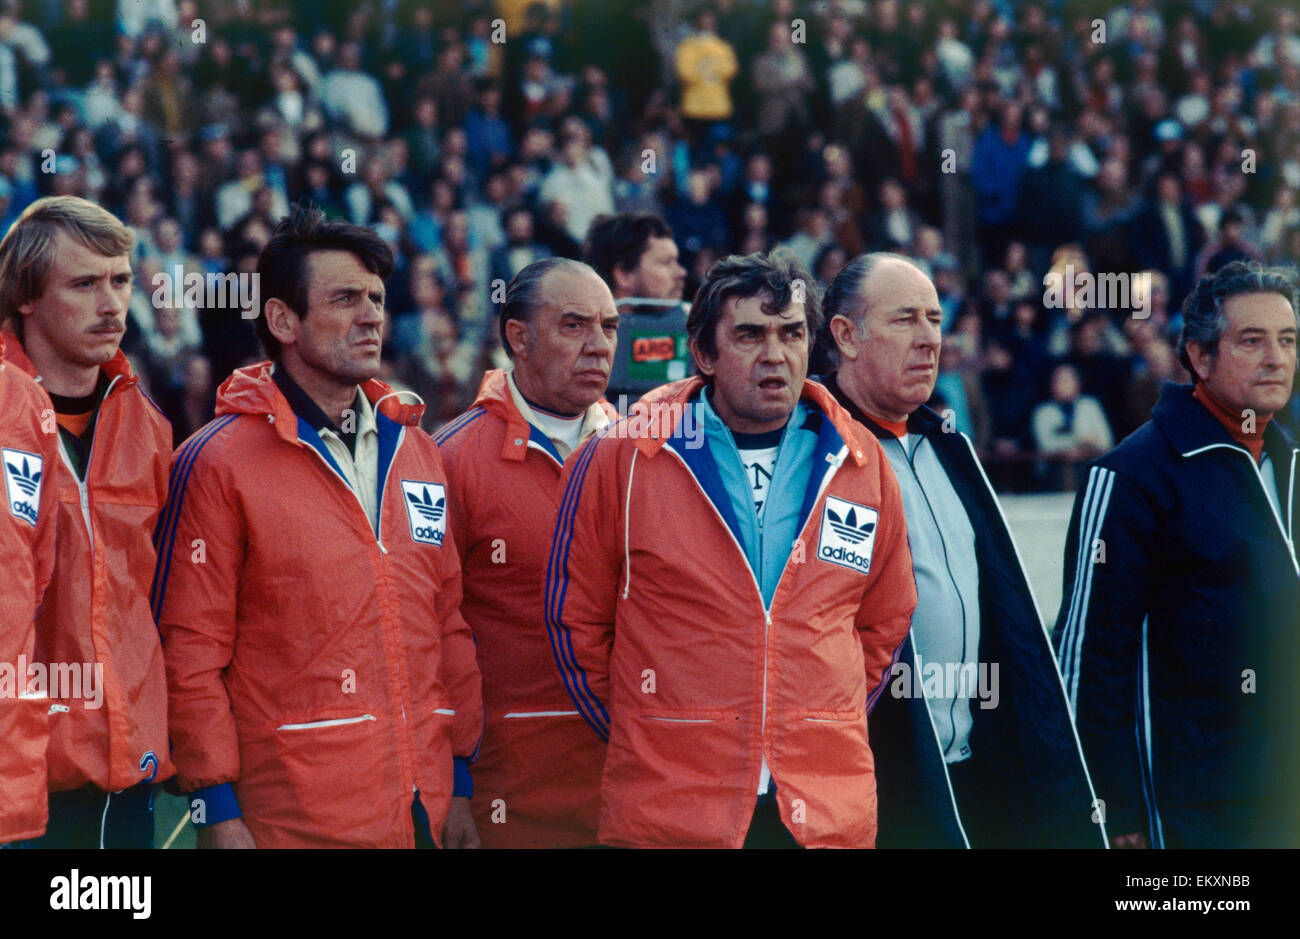 World Cup Second Round Group A match in Cordoba, Argentina. Holland 2 v West Germany 2. Dutch manager Ernst Happel watches from the sidelines (3rd from right). 18th June 1978. Stock Photo